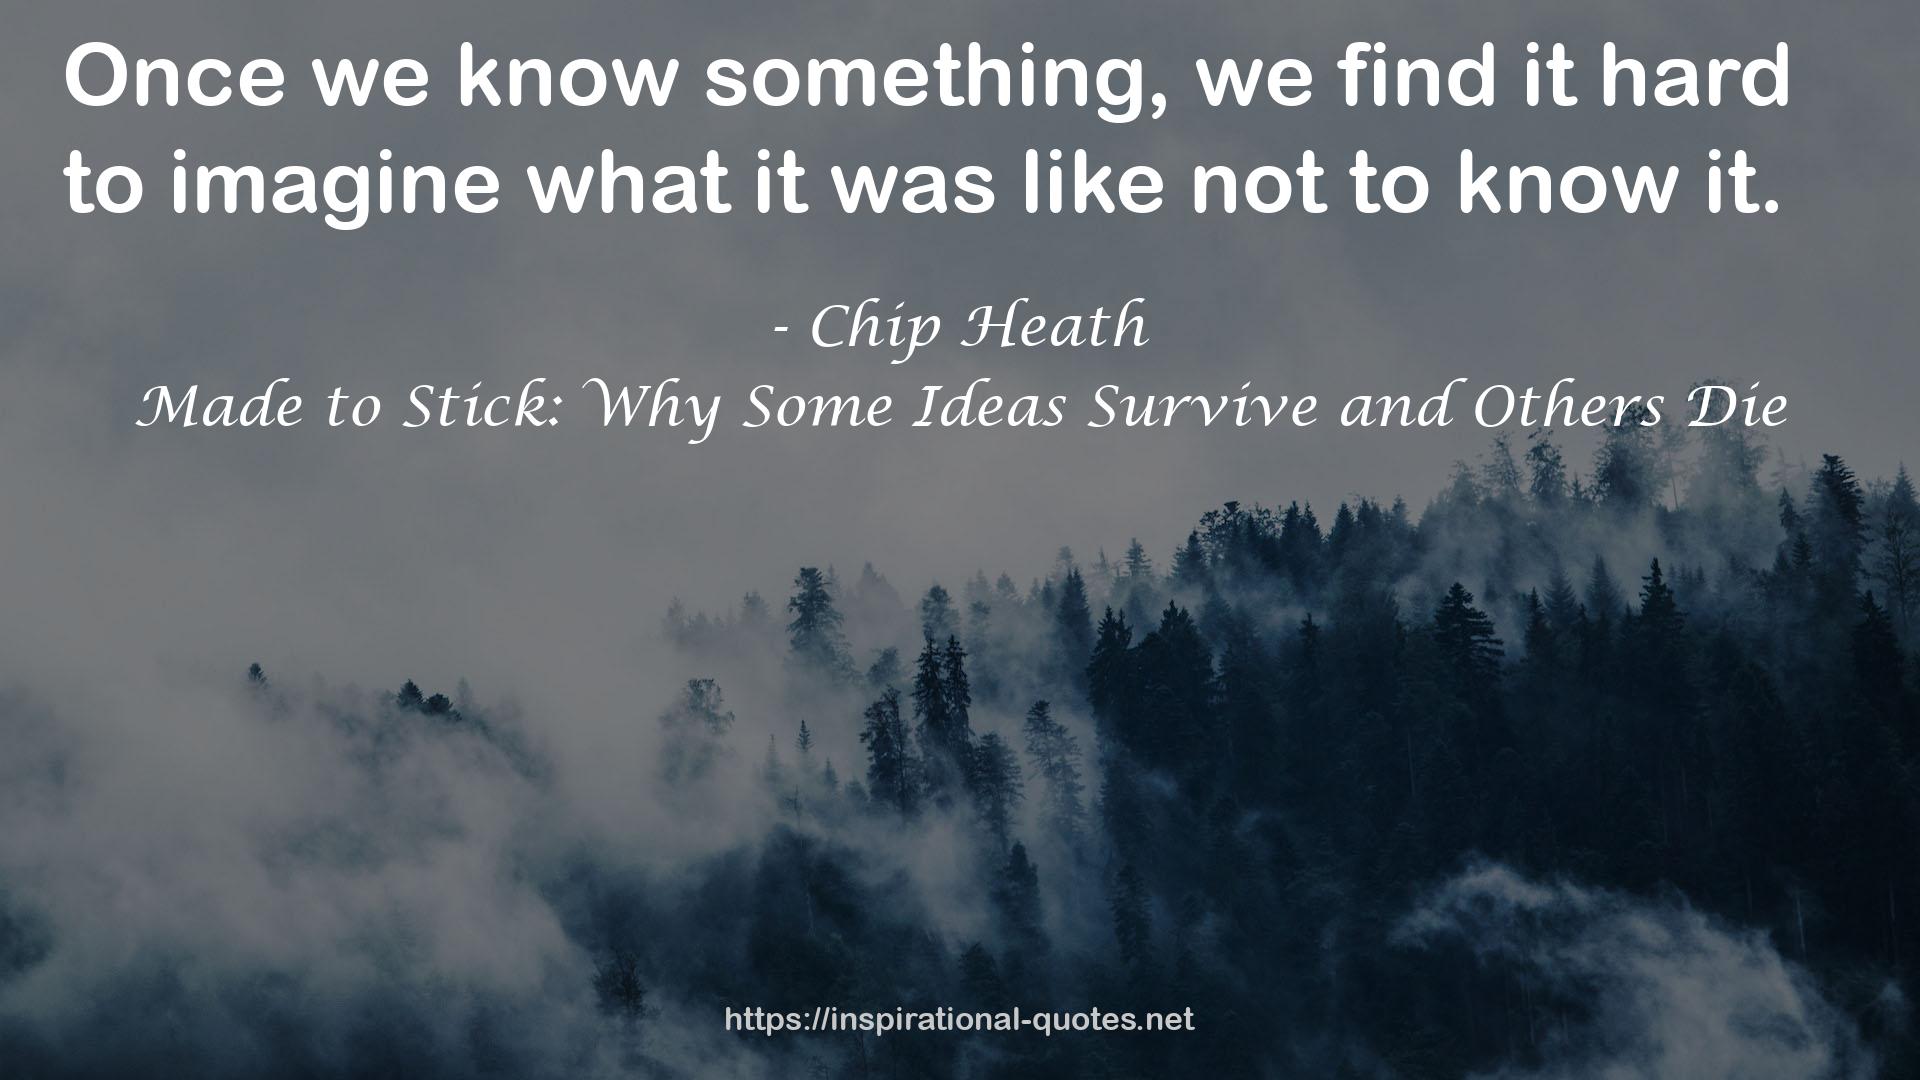 Made to Stick: Why Some Ideas Survive and Others Die QUOTES